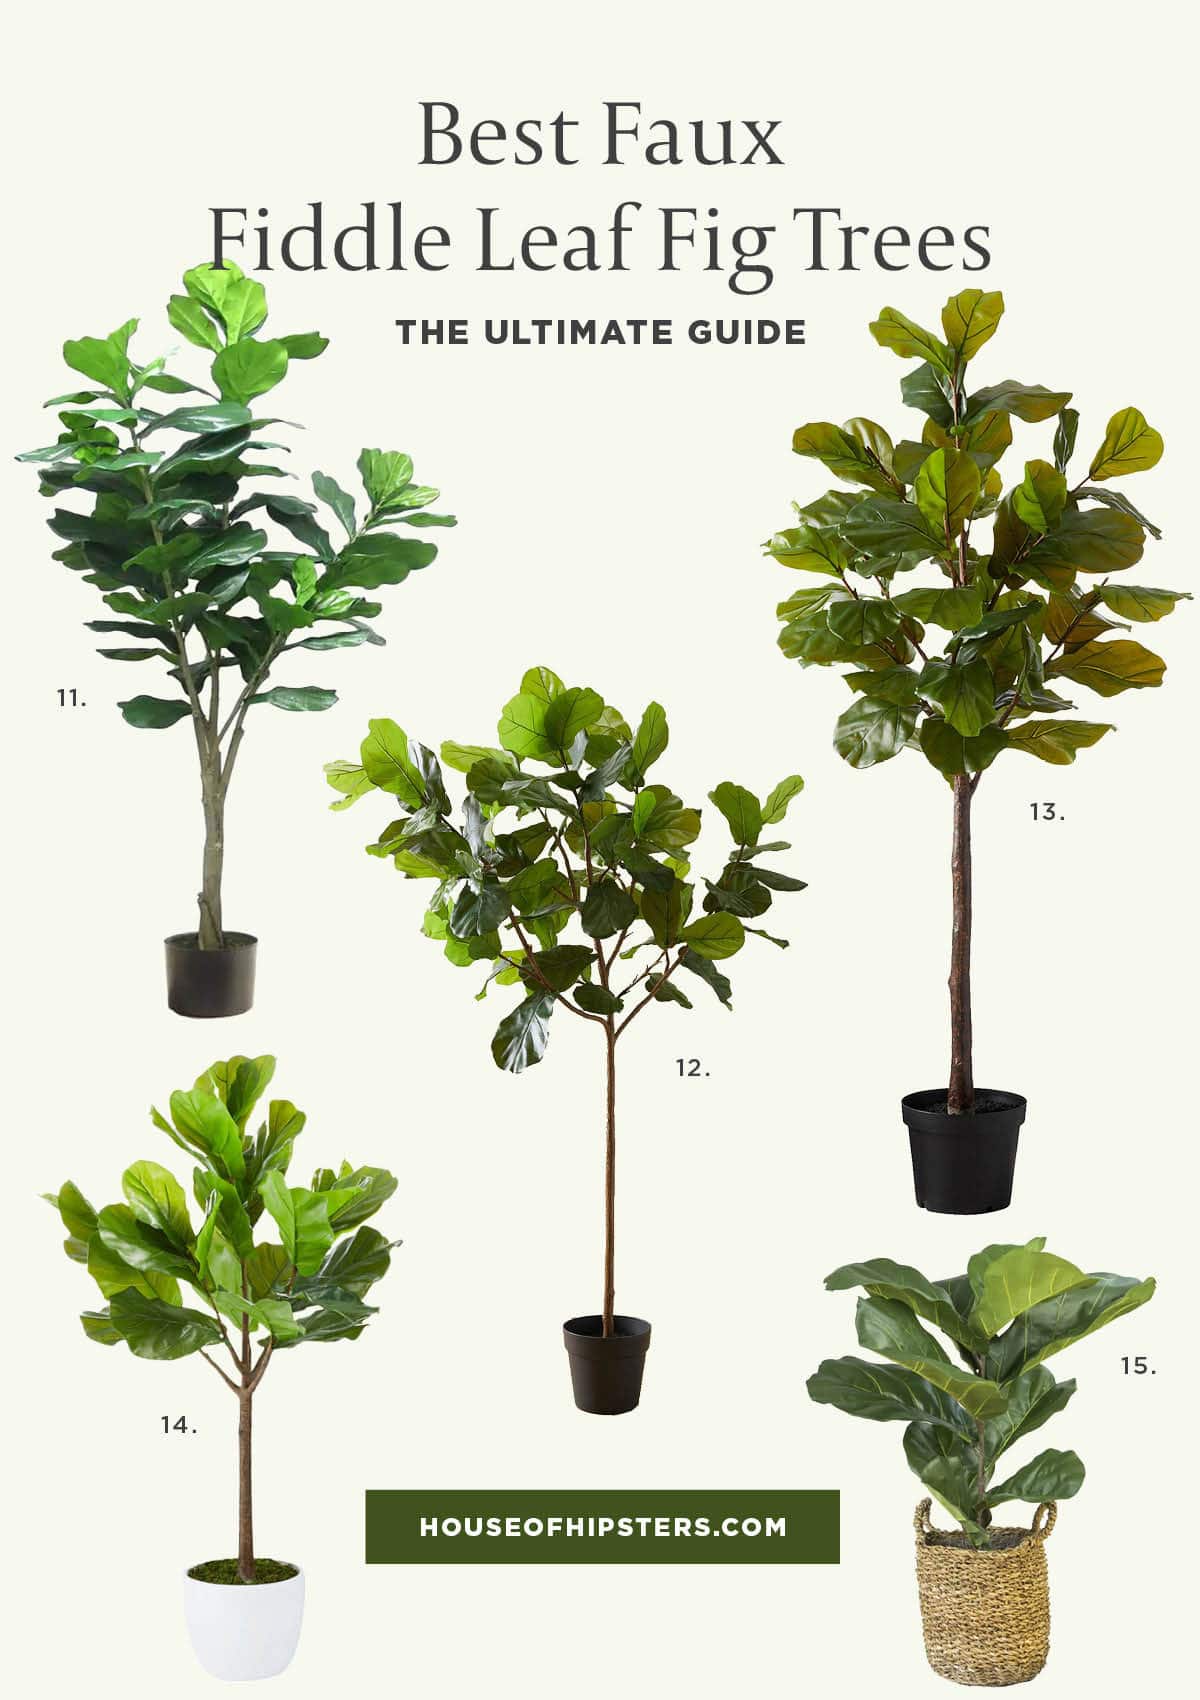 Ultimate Guide To The Best Faux Fiddle Leaf Fig Trees